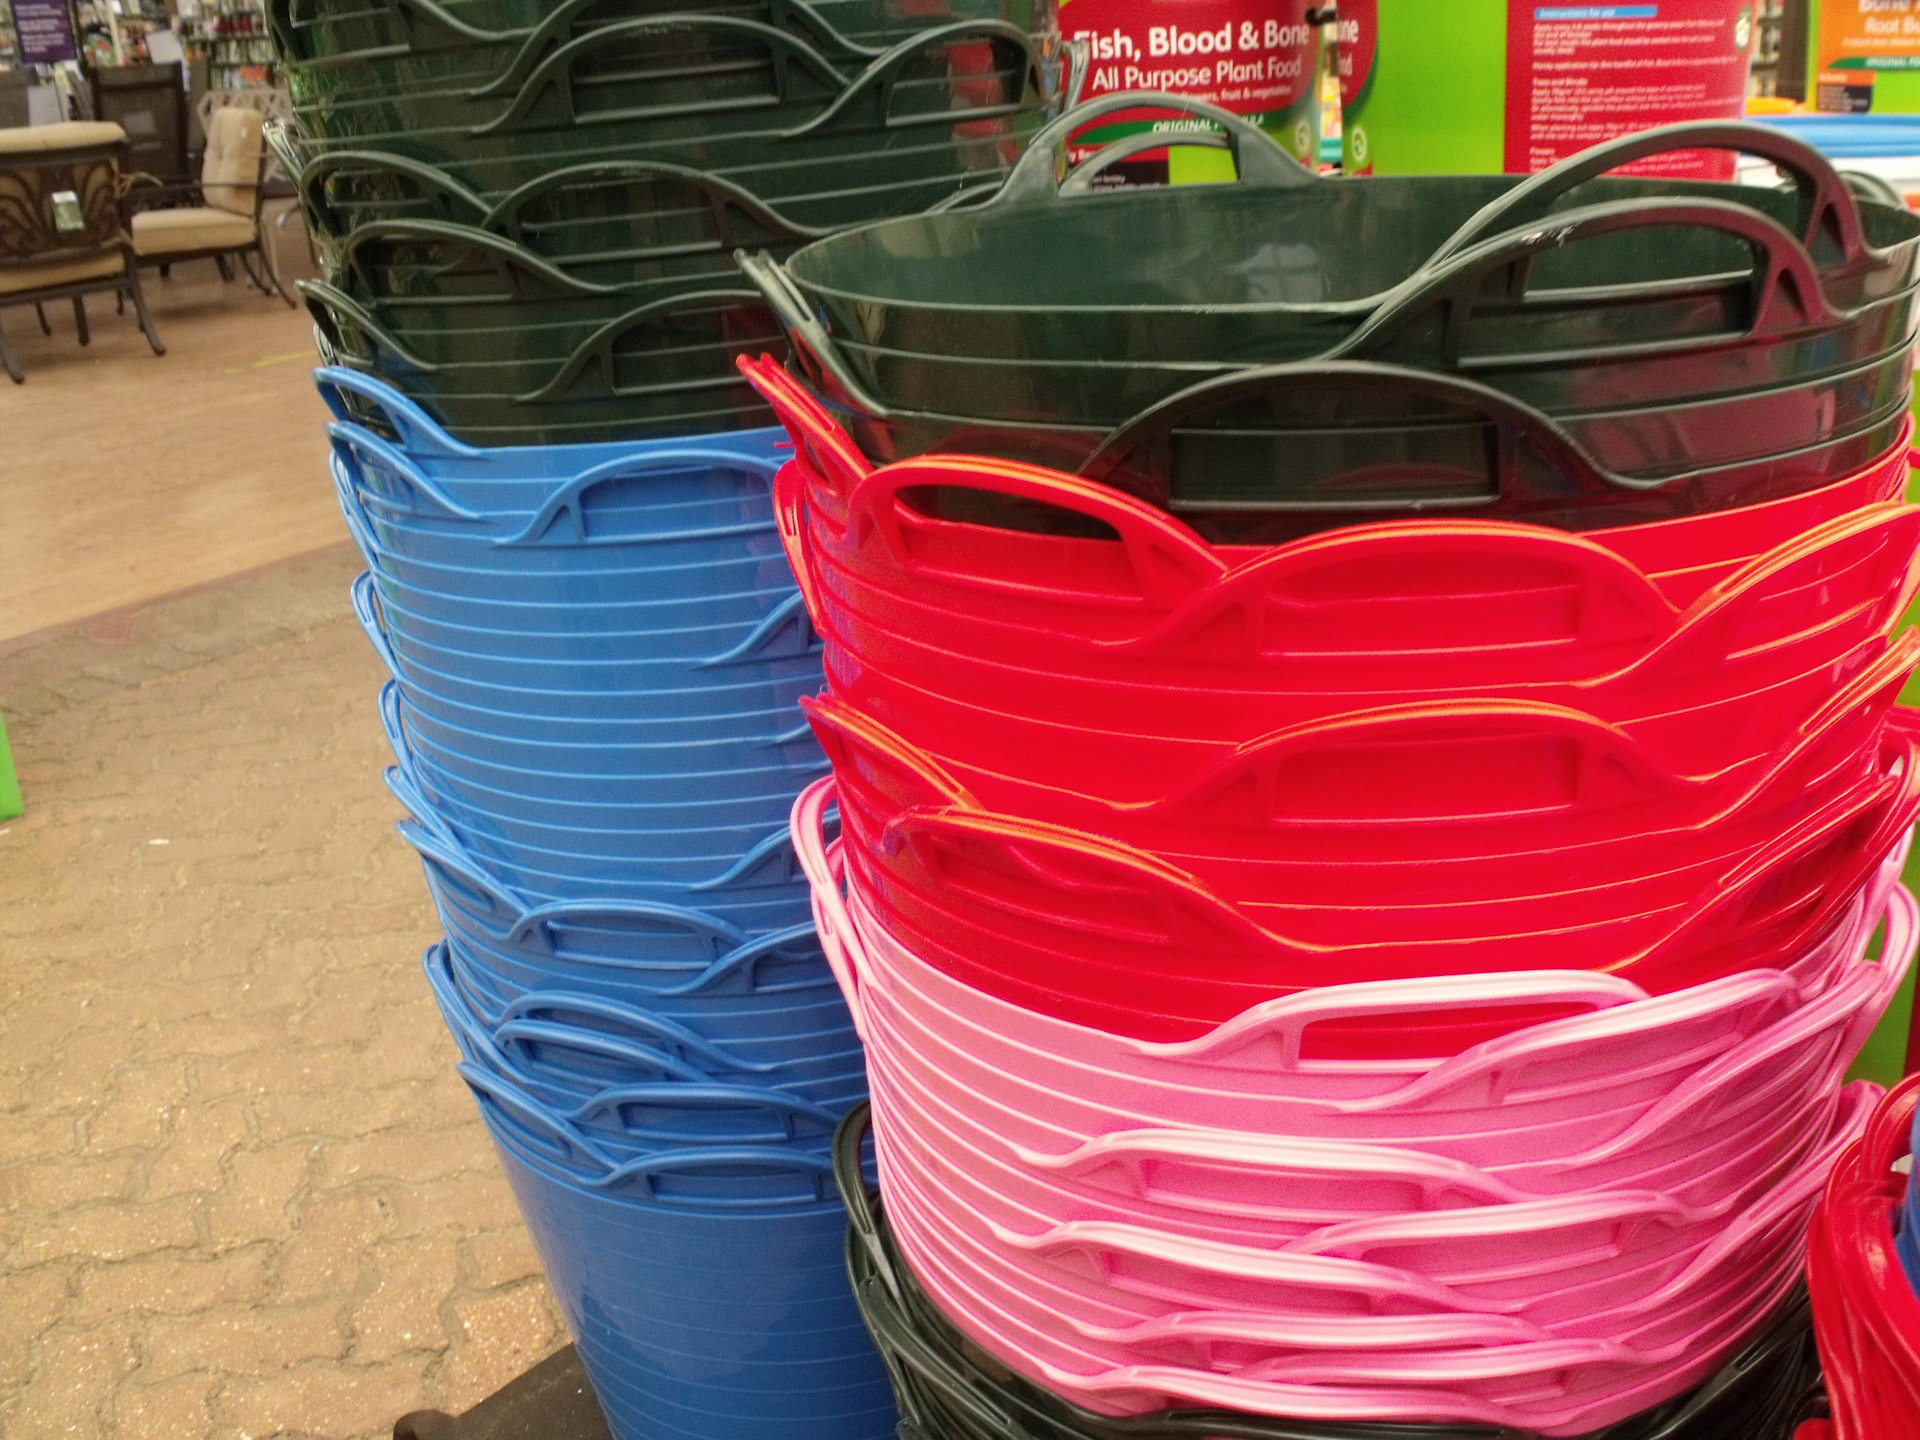 red blue pink coloured baskets coloured baskets free photo